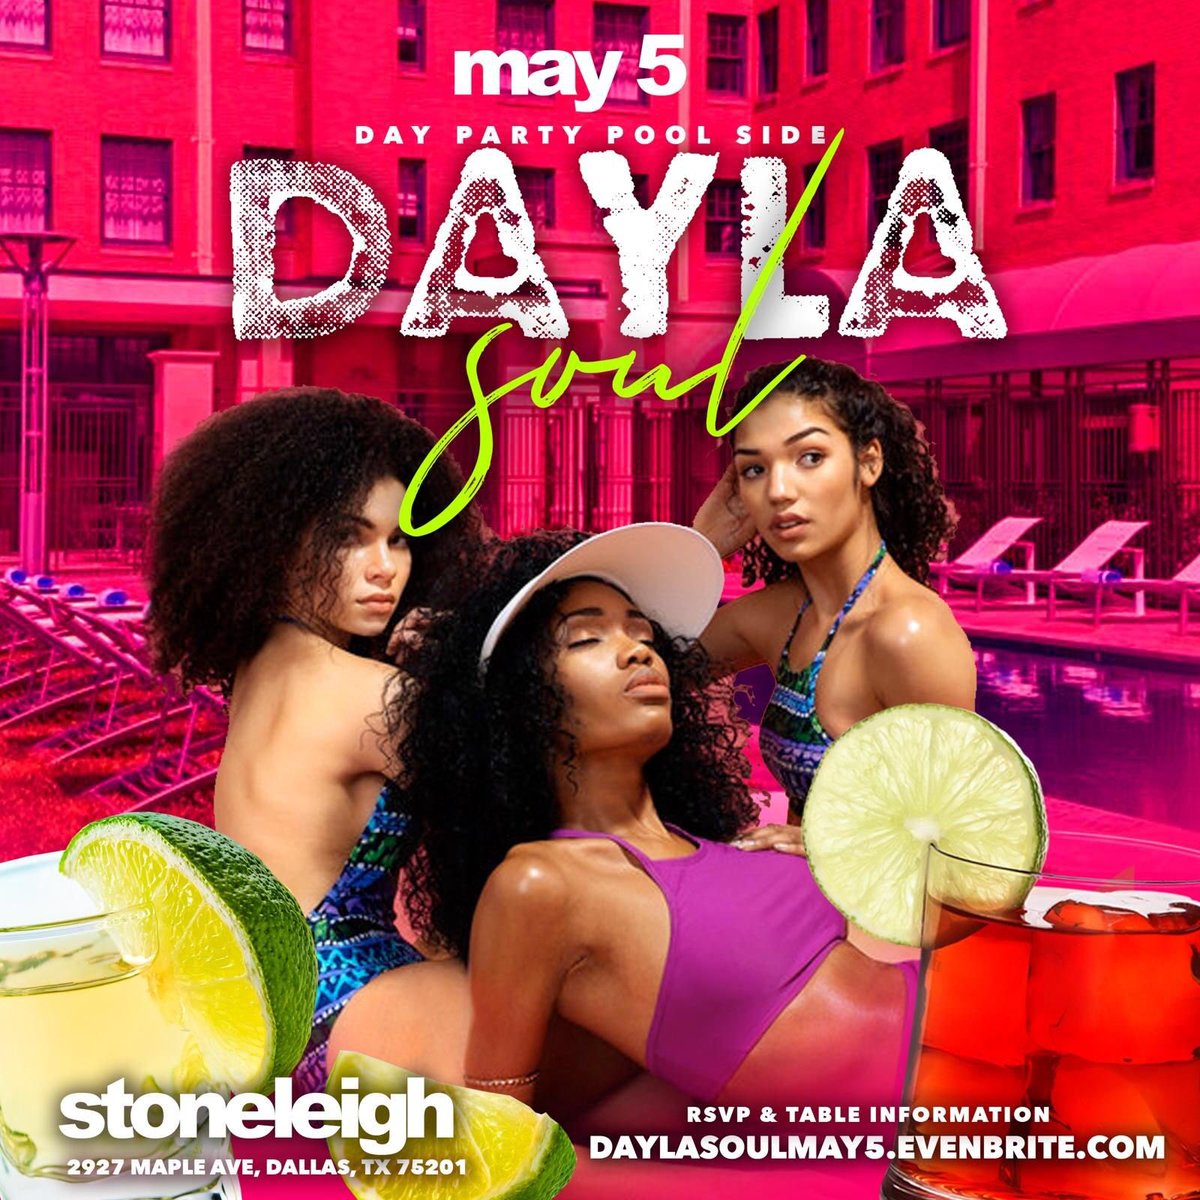 [CINCO DE MAYO] #DAYlasoul DAY/Pool Party @ The Stoneleigh Hotel #UPTOWNDALLAS
3PM - 8PM. Free til 4pm w/RSVP and Don Julio sampling until 5pm. Stylish attire (NO ATHLETIC WEAR) Swimwear optional. There will be guest DJs + Food + #Hookah. RSVP NOW!! @PartyChaser @TheDesireGroup_